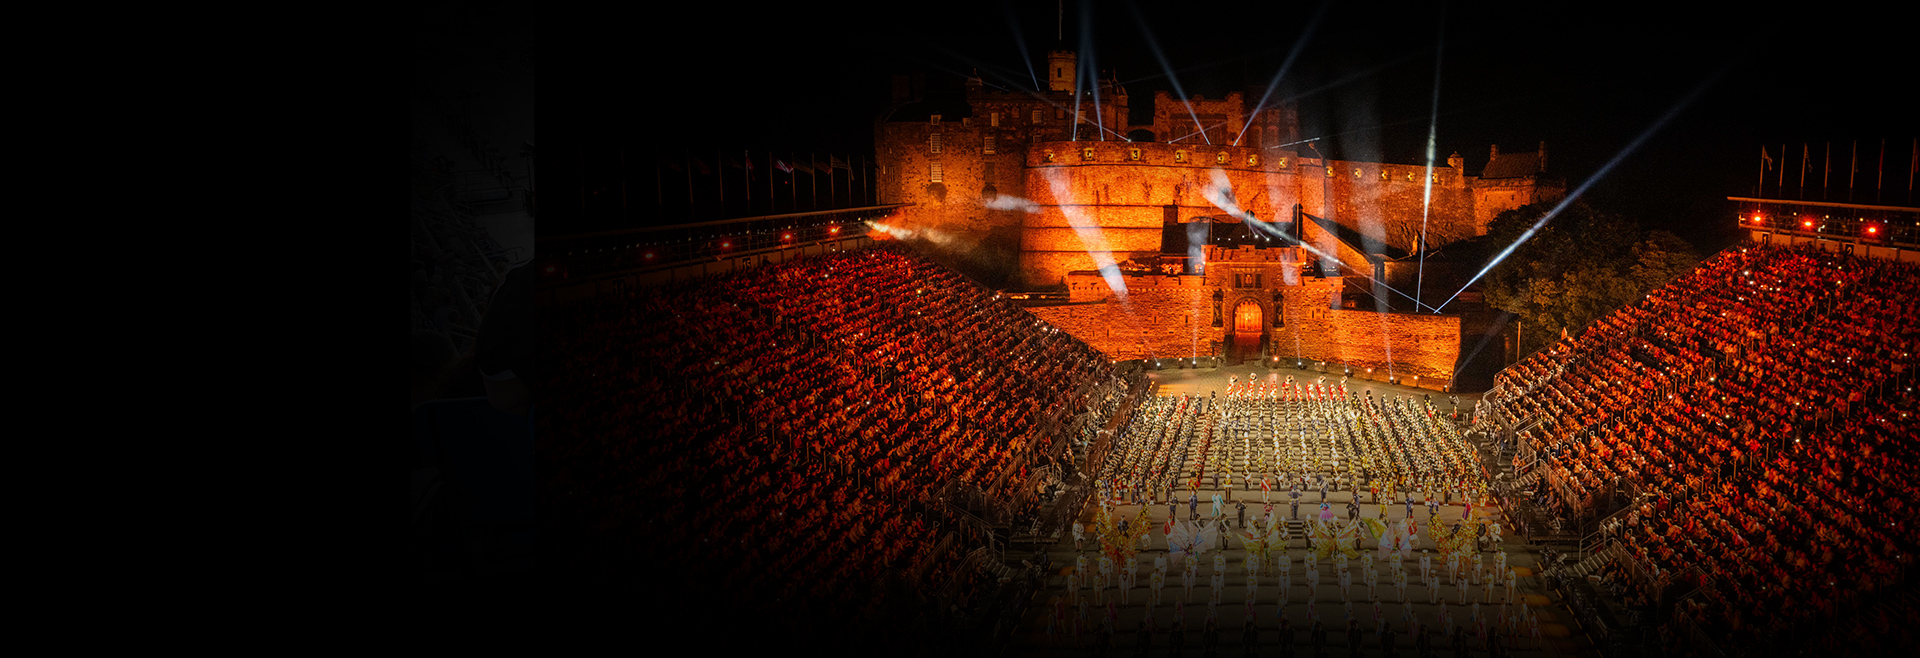 Edinburgh Tattoo back with a bang as it returns after Covid cancellations |  Evening Standard